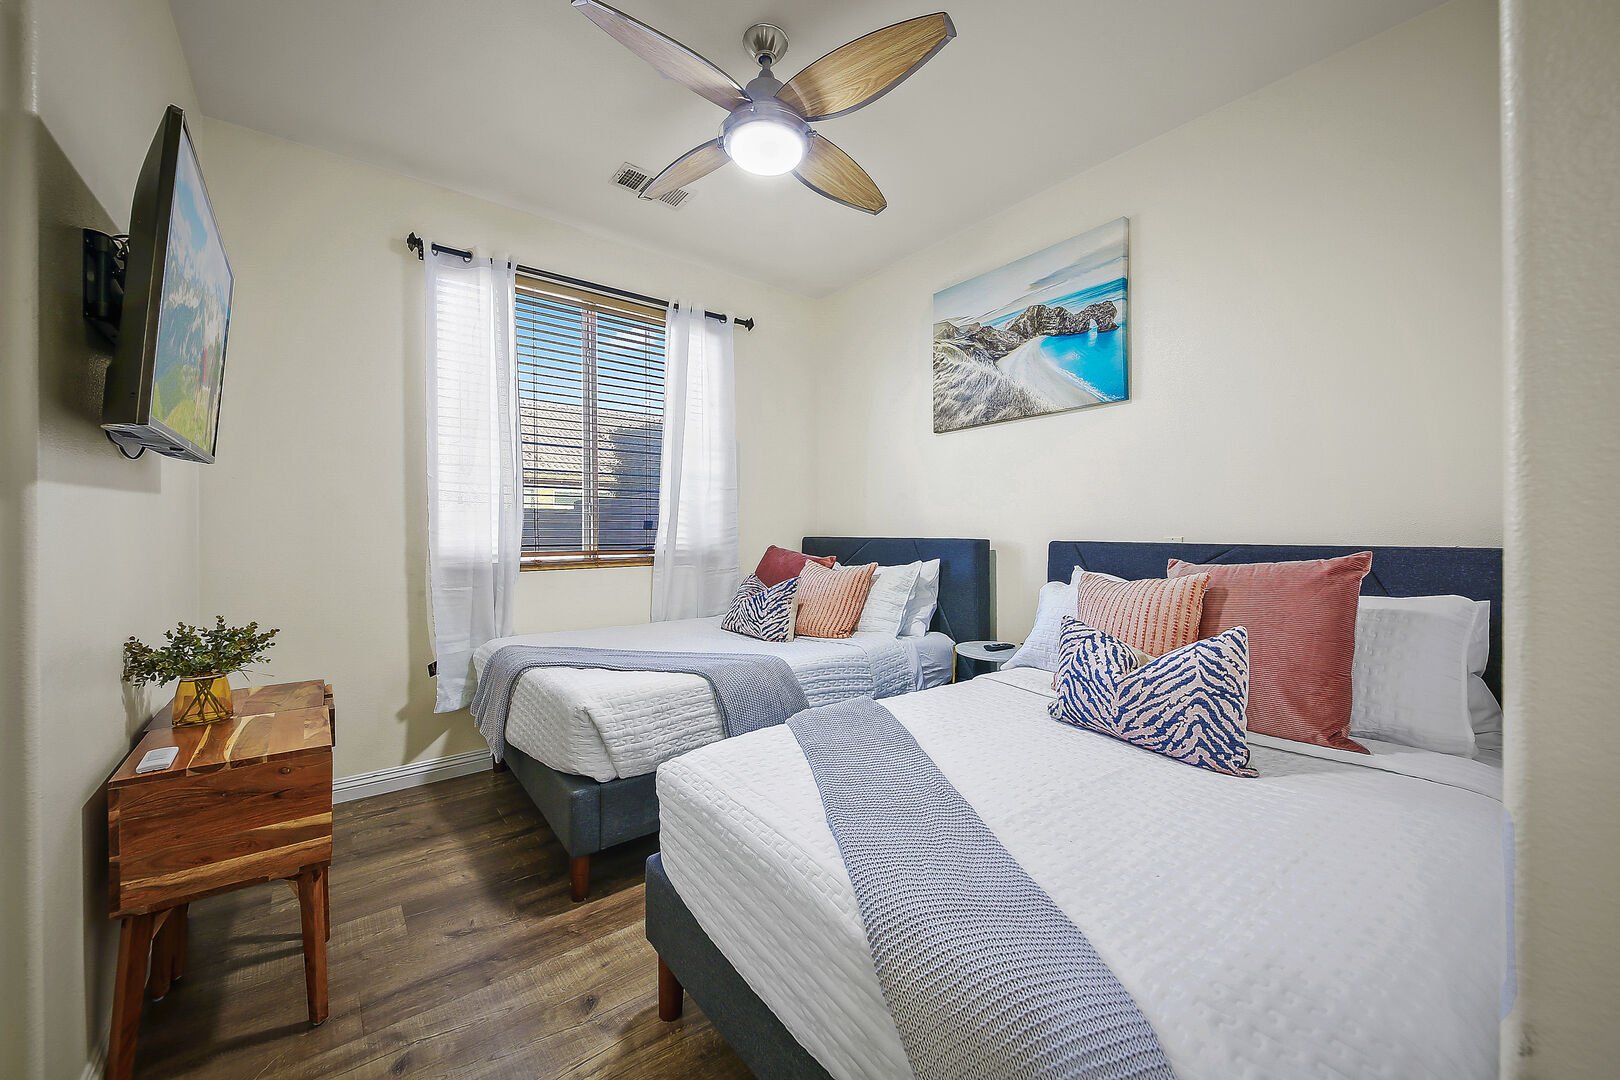 Bedroom 3 features two Full-sized Beds, 44-inch LG Smart television, a remote-controlled ceiling fan, and a reach-in closet.